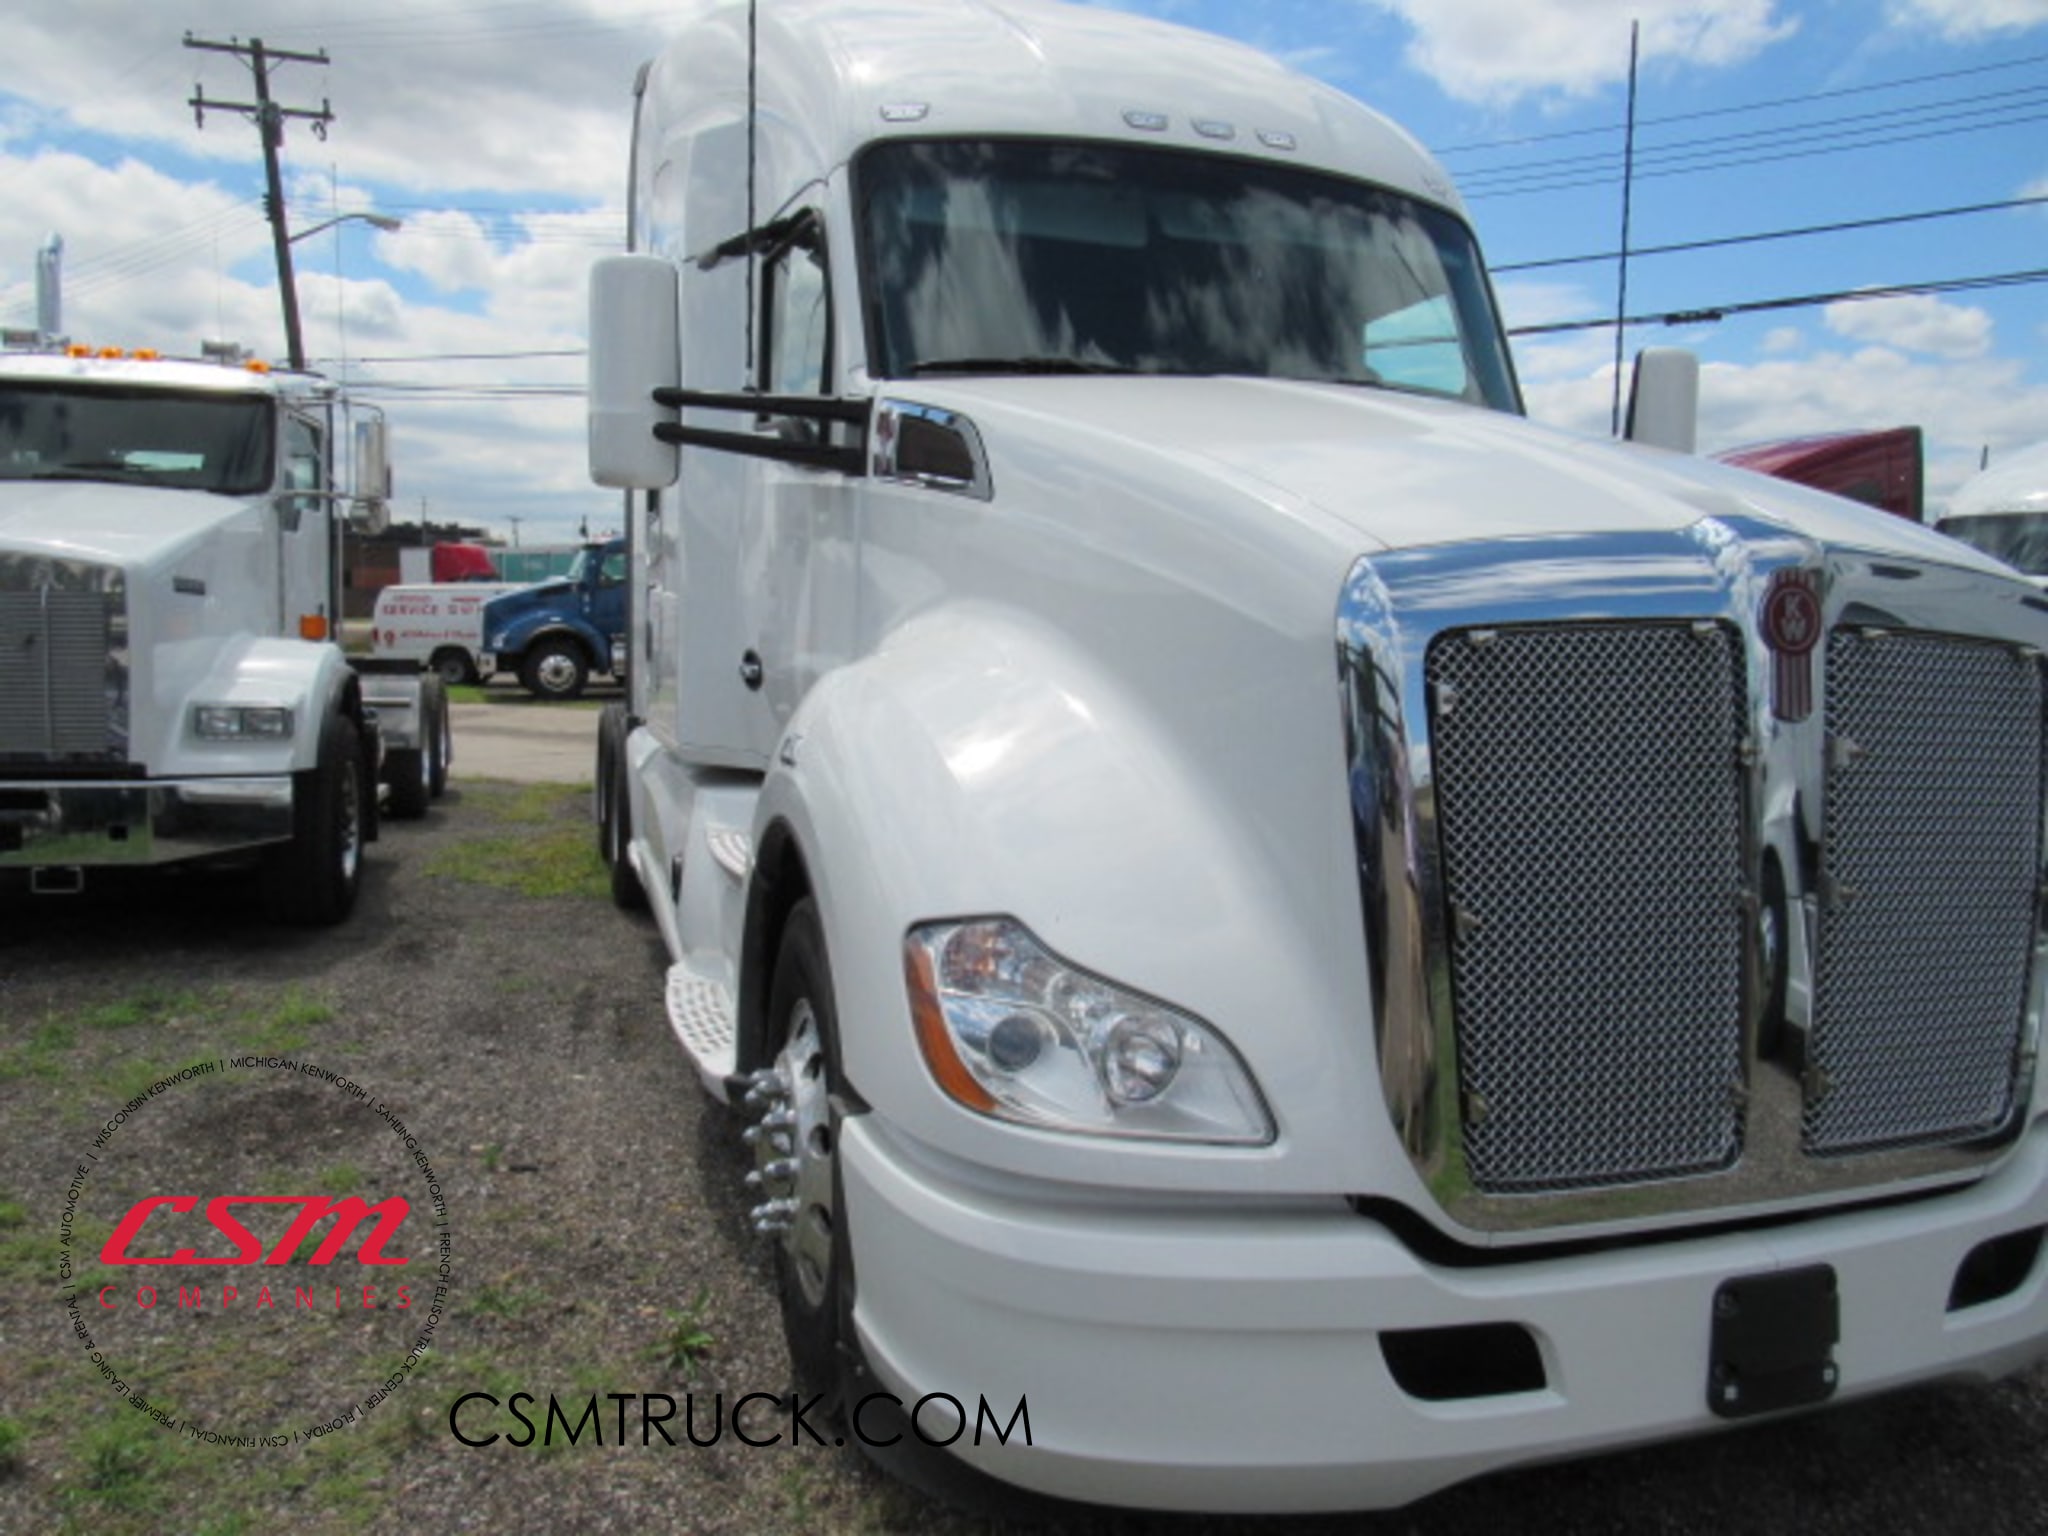 Exterior front passenger side for this 2020 Kenworth T680 (Stock number: ULJ390212)